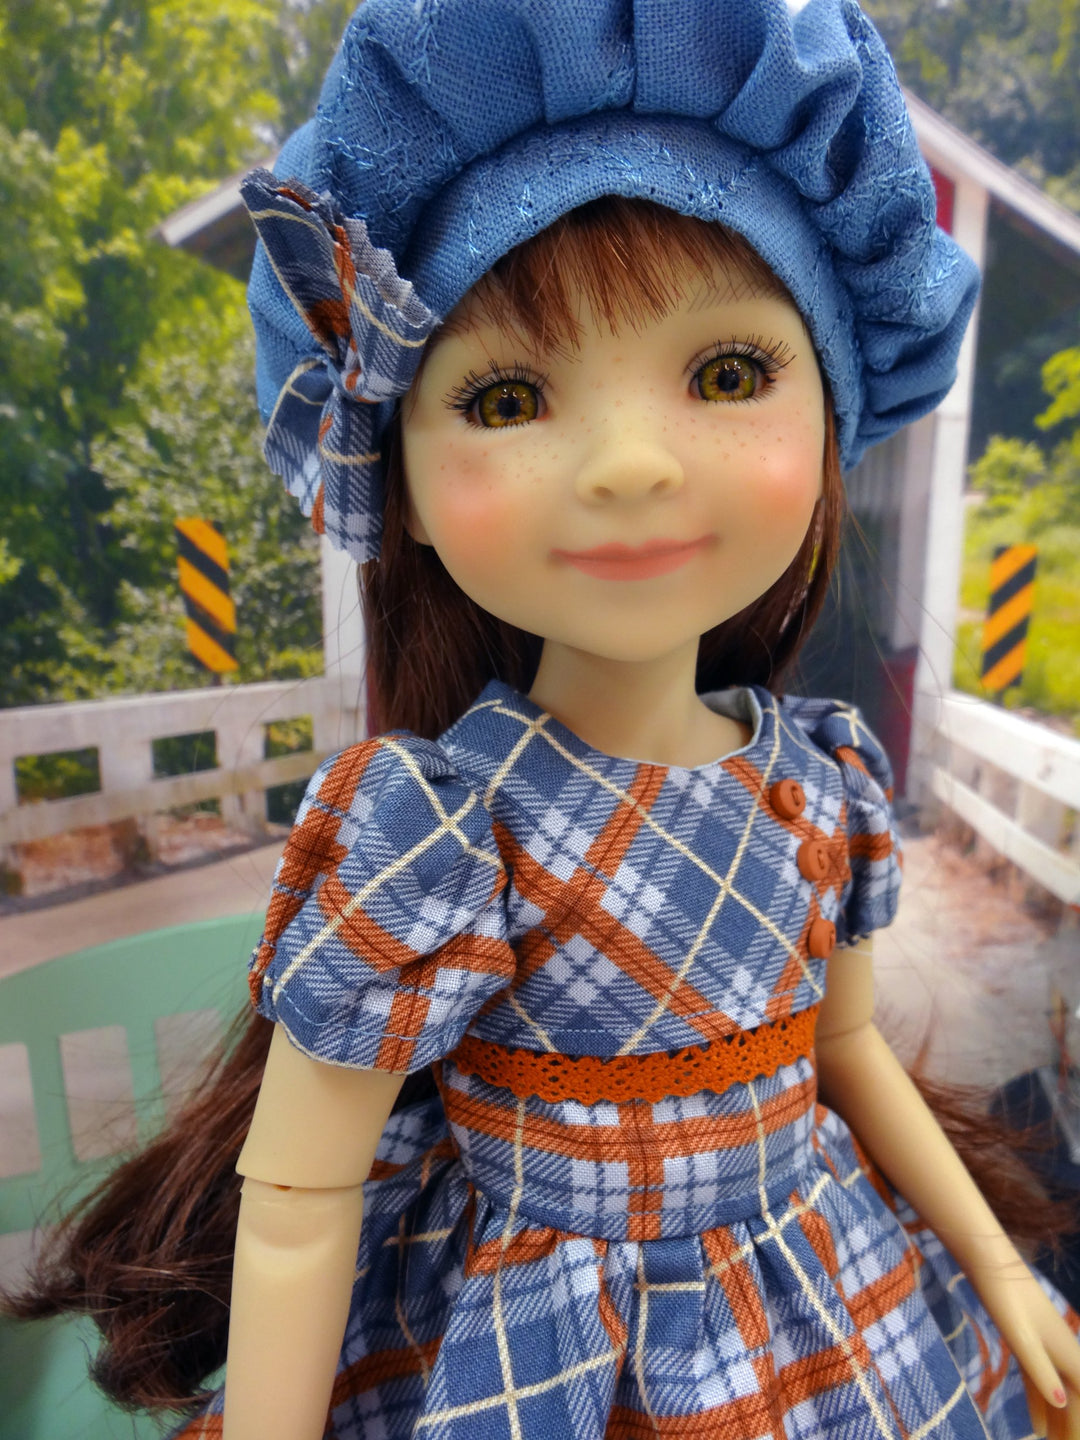 Plaid Outing - dress & capelet for Ruby Red Fashion Friends doll